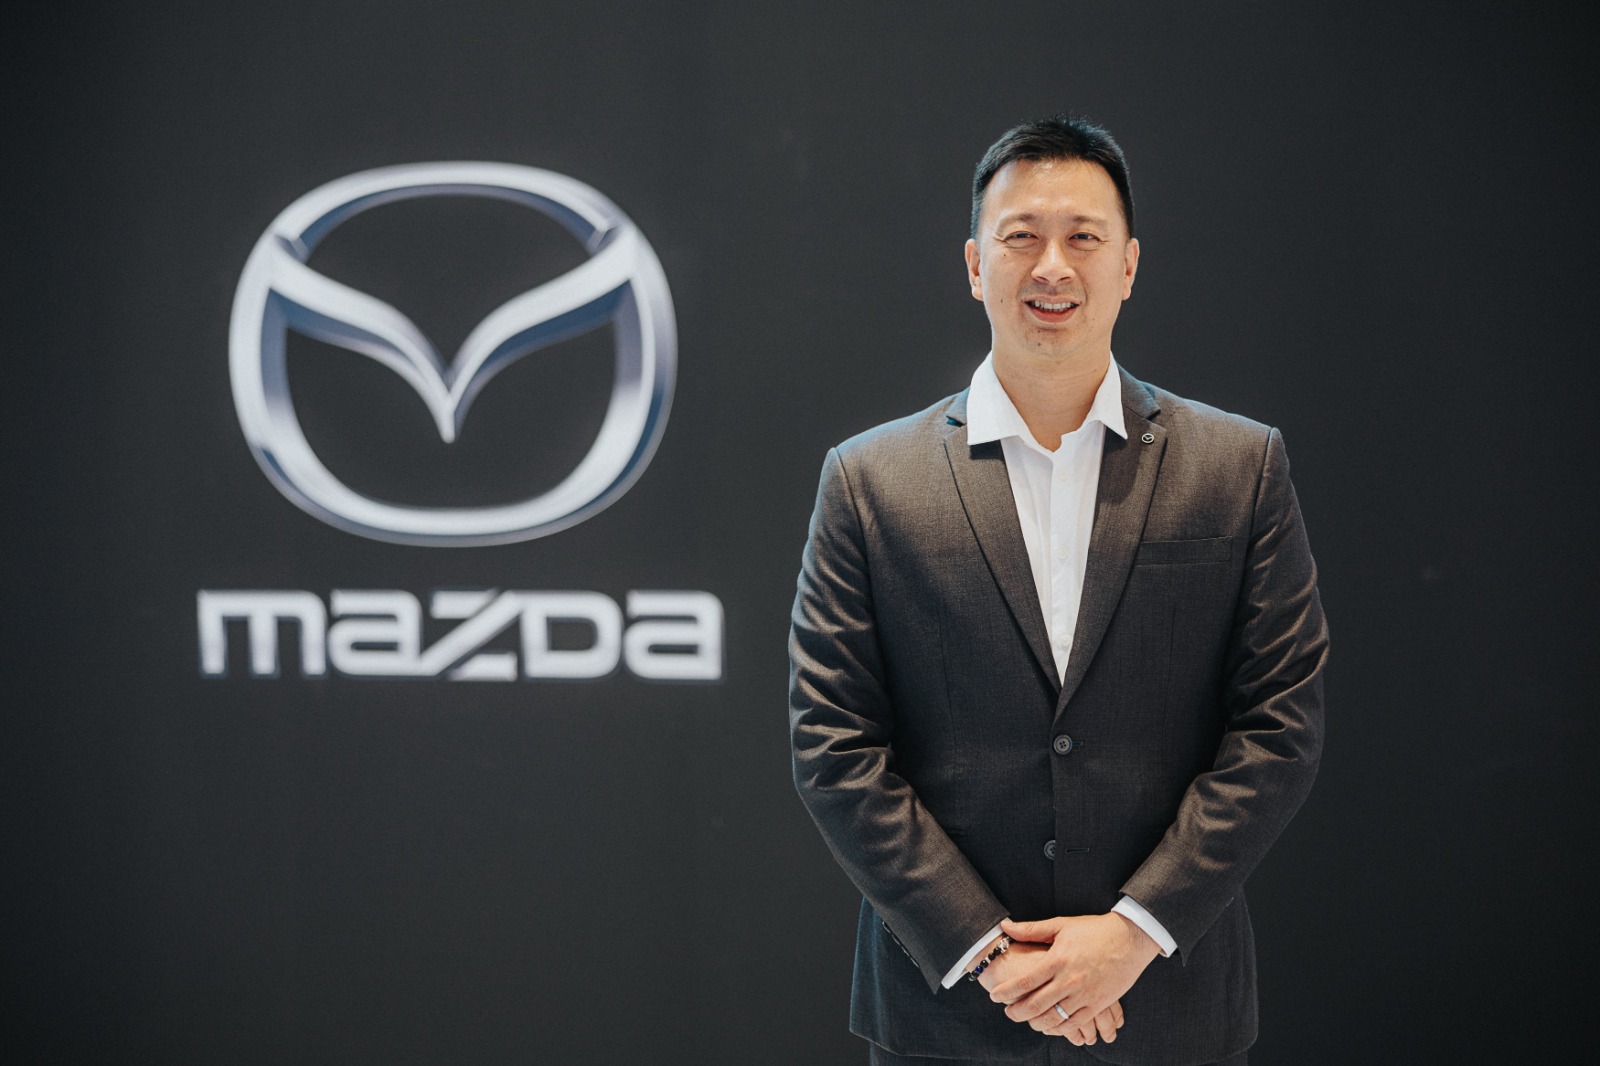 mazda cx-60, cx60, dezire+, eurokars, chong kah wei, karsono kwee, mazda, mazdaspeed, cx-60, mazda cx-60, eurokars, dezire+ lifestyle programme launched with mazda cx-60 in singapore : mazda’s deep dezire+